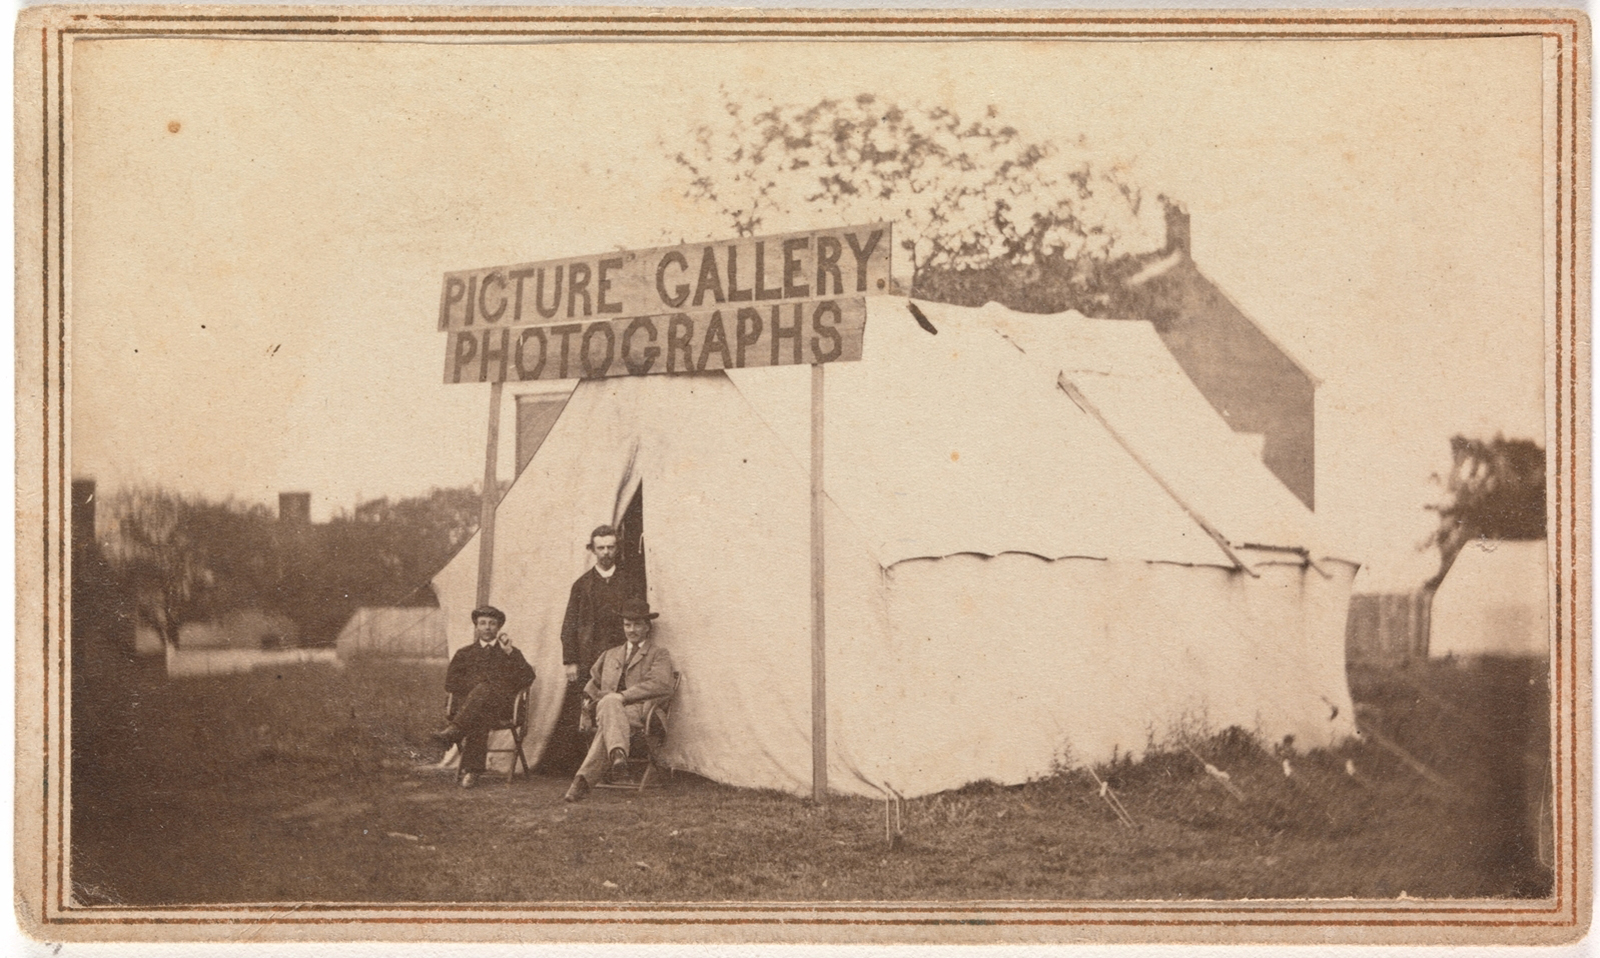 Picture gallery photographs, 1860s. (Alfred Stieglitz Society Gifts/The Metropolitan Museum of Art)